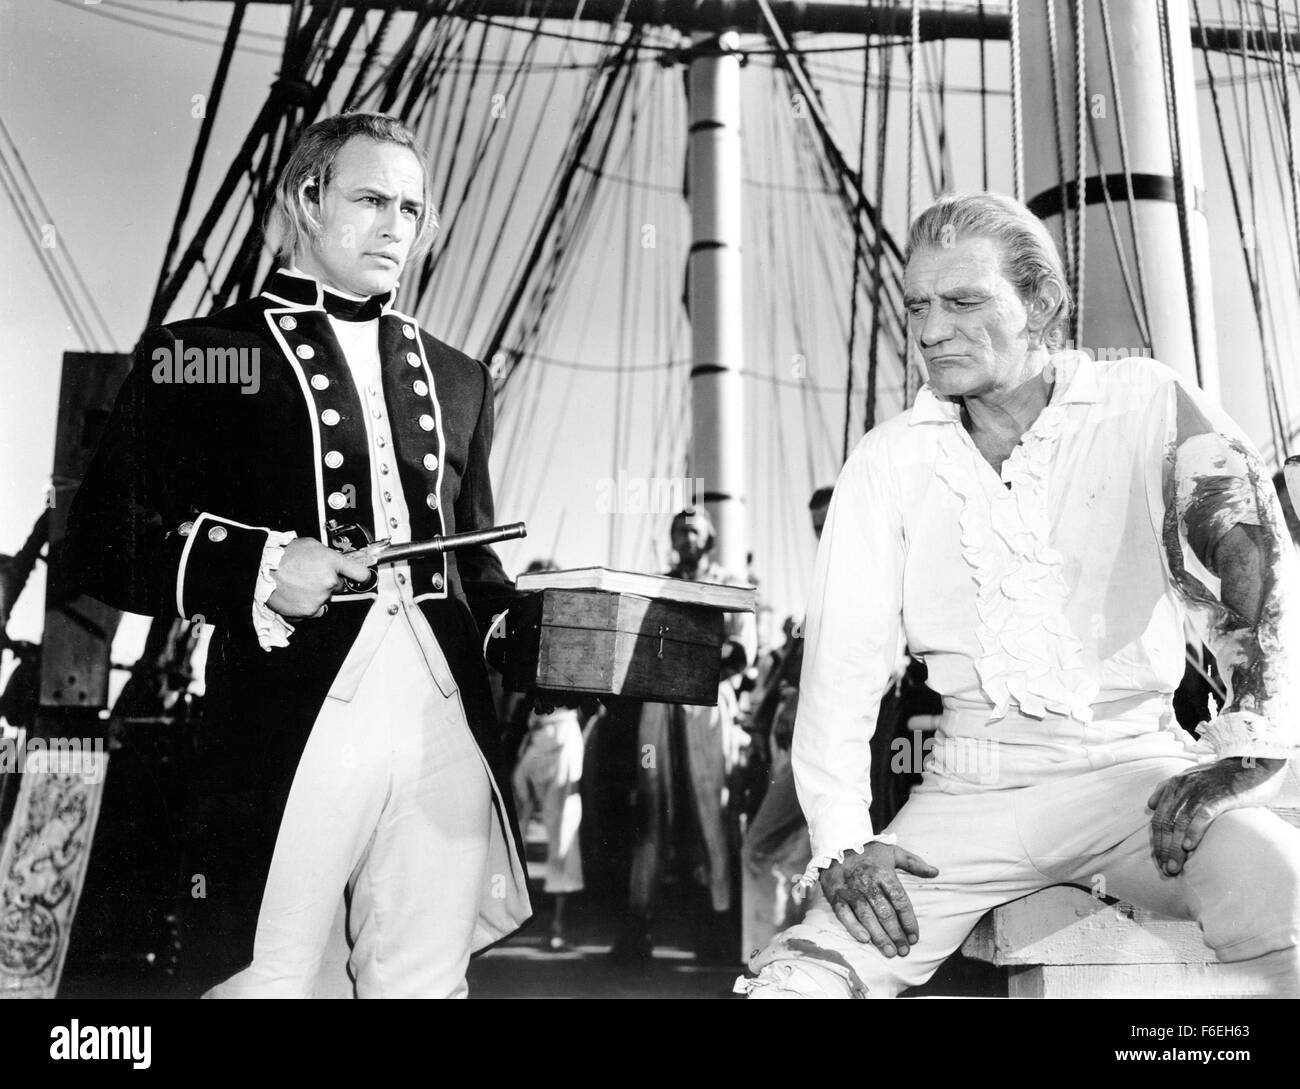 RELEASE DATE: November 8, 1962. MOVIE TITLE: Mutiny on the Bounty. STUDIO: Metro-Goldwyn-Mayer (MGM). PLOT: The Bounty leaves Portsmouth in 1787. Its destination: to sail to Tahiti and load bread-fruit. Captain Bligh will do anything to get there as fast as possible, using any means to keep up a strict discipline. When they arrive at Tahiti, it is like a paradise for the crew, something completely different than the living hell on the ship. On the way back to England, officer Fletcher Christian becomes the leader of a mutiny. PICTURED: MARLON BRANDO as 1st Lt. Fletcher Christian and TREVOR HOW Stock Photo